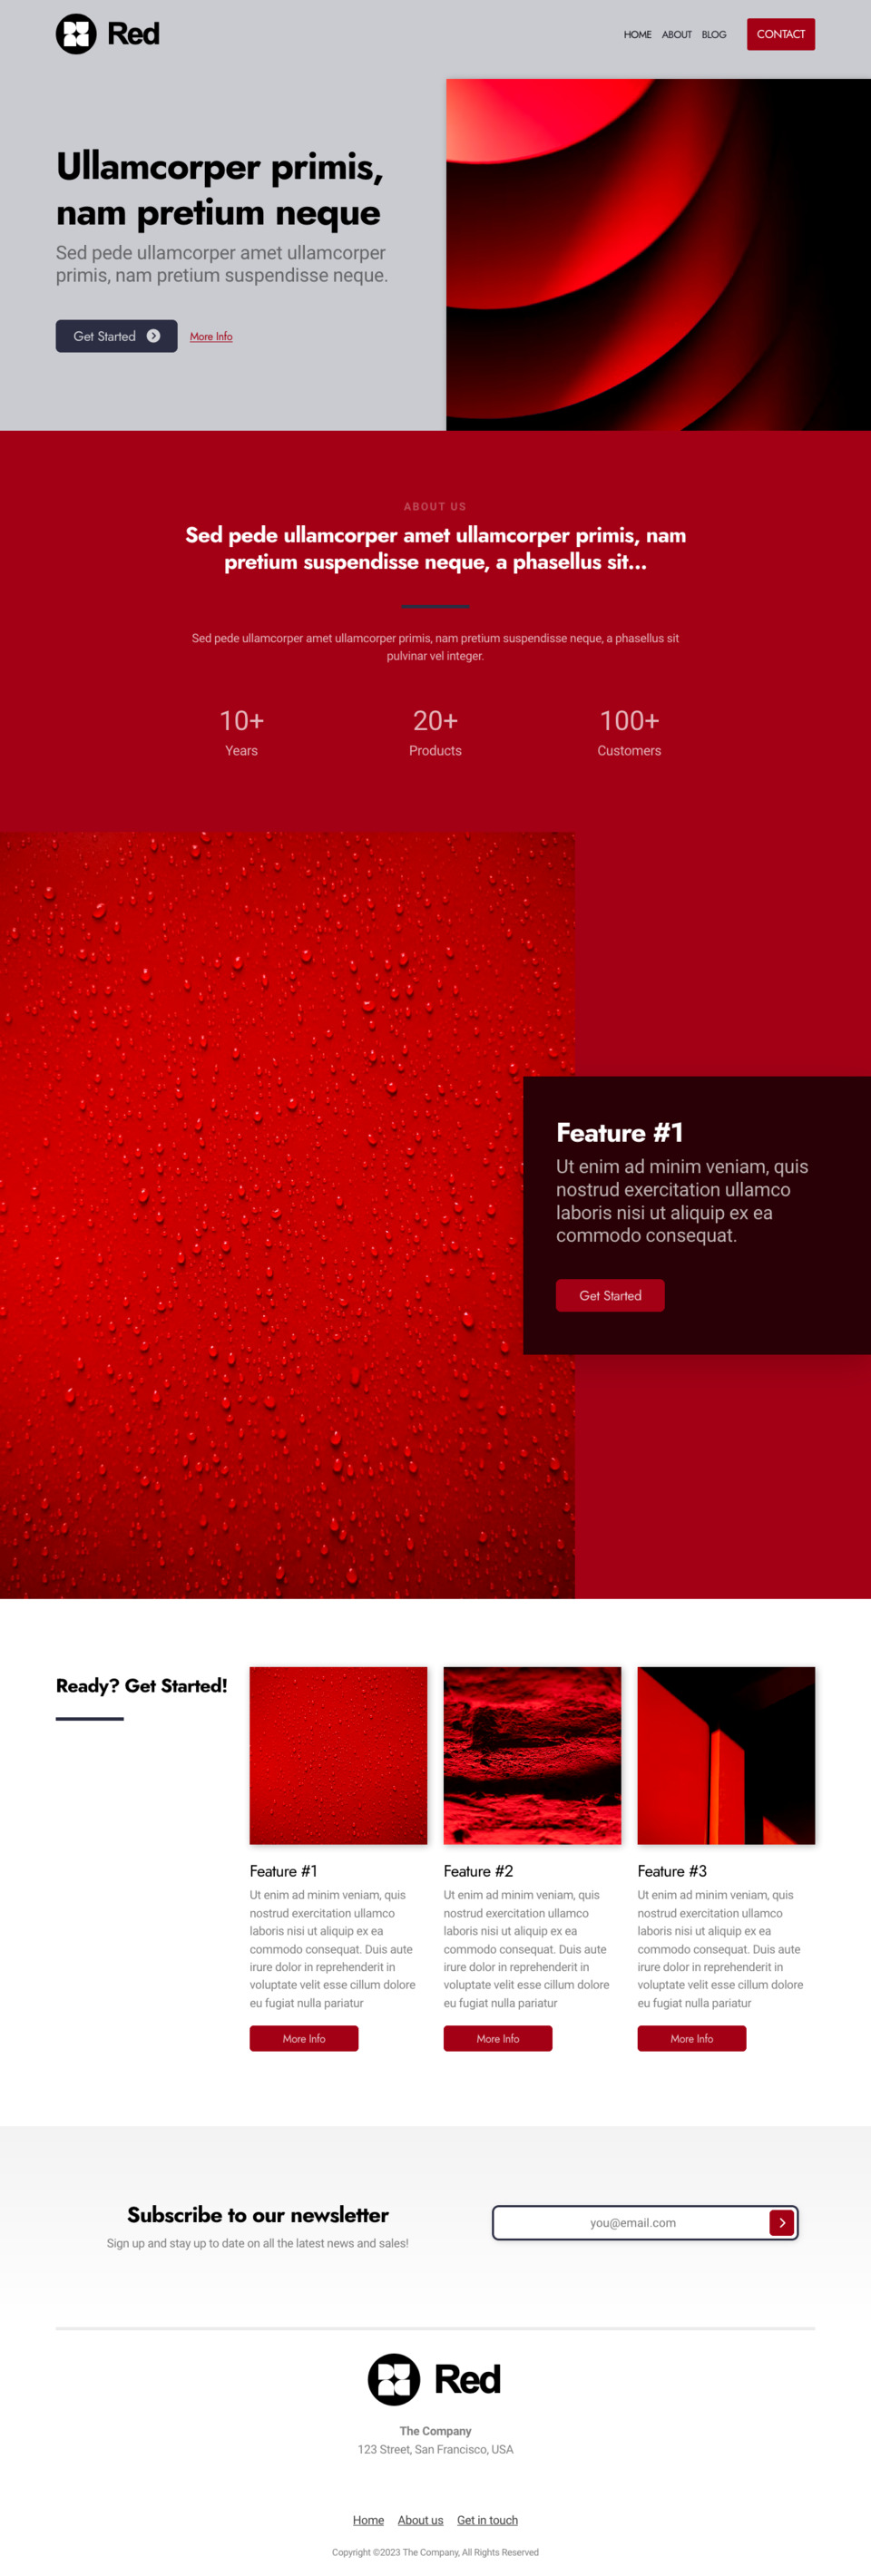 Red Website Template - Ideal for businesses looking for a vibrant and passionate online presence.